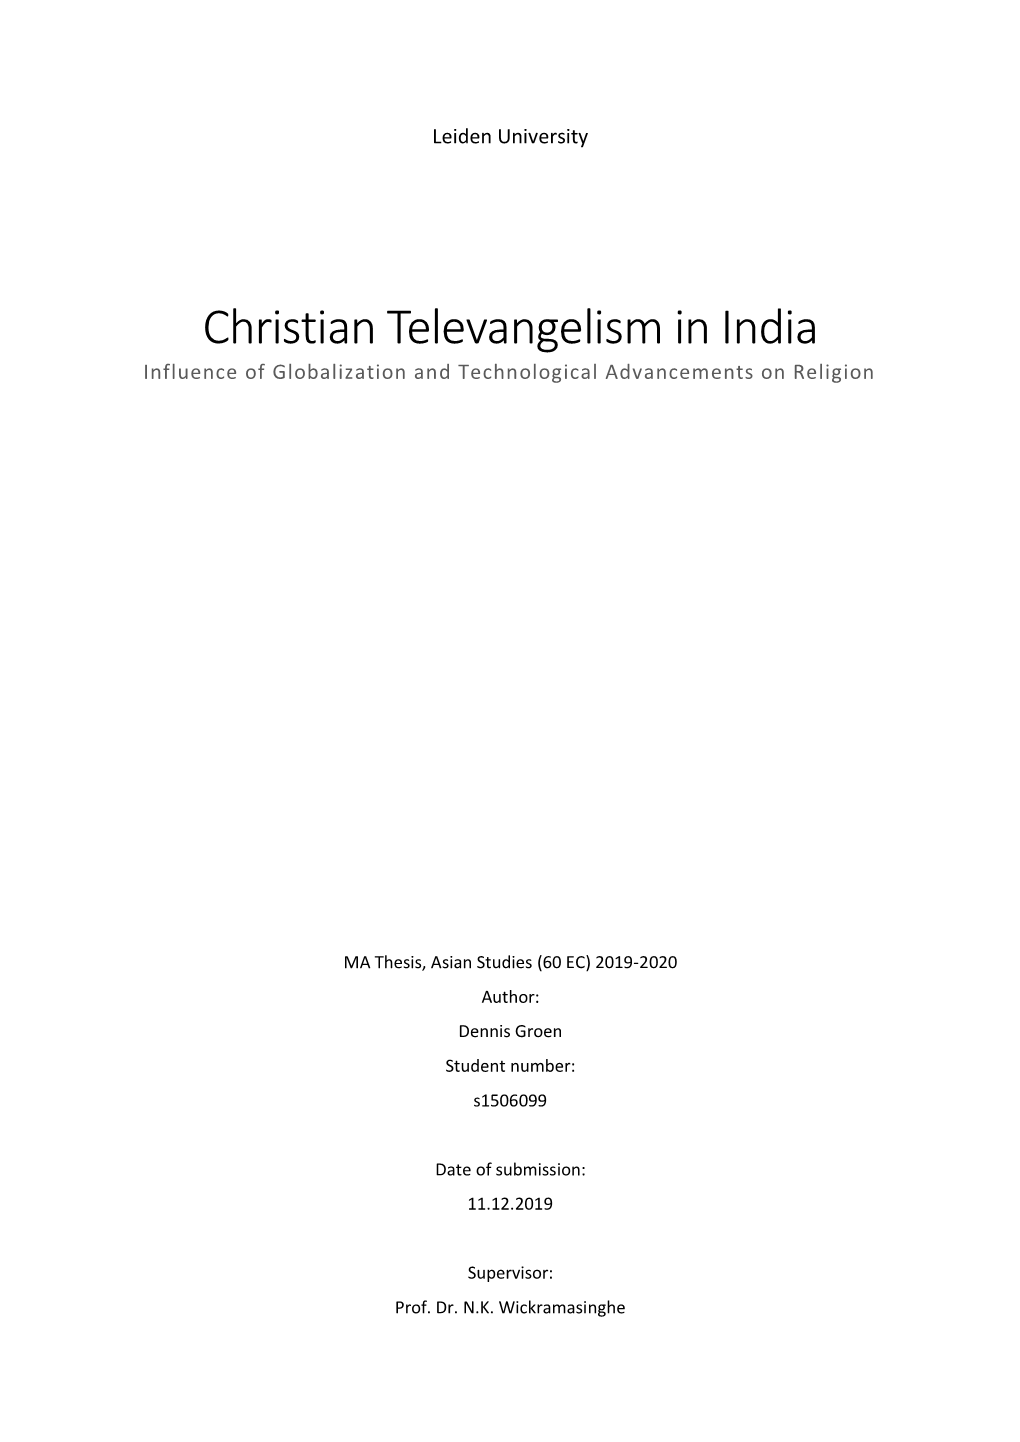 Christian Televangelism in India Influence of Globalization and Technological Advancements on Religion